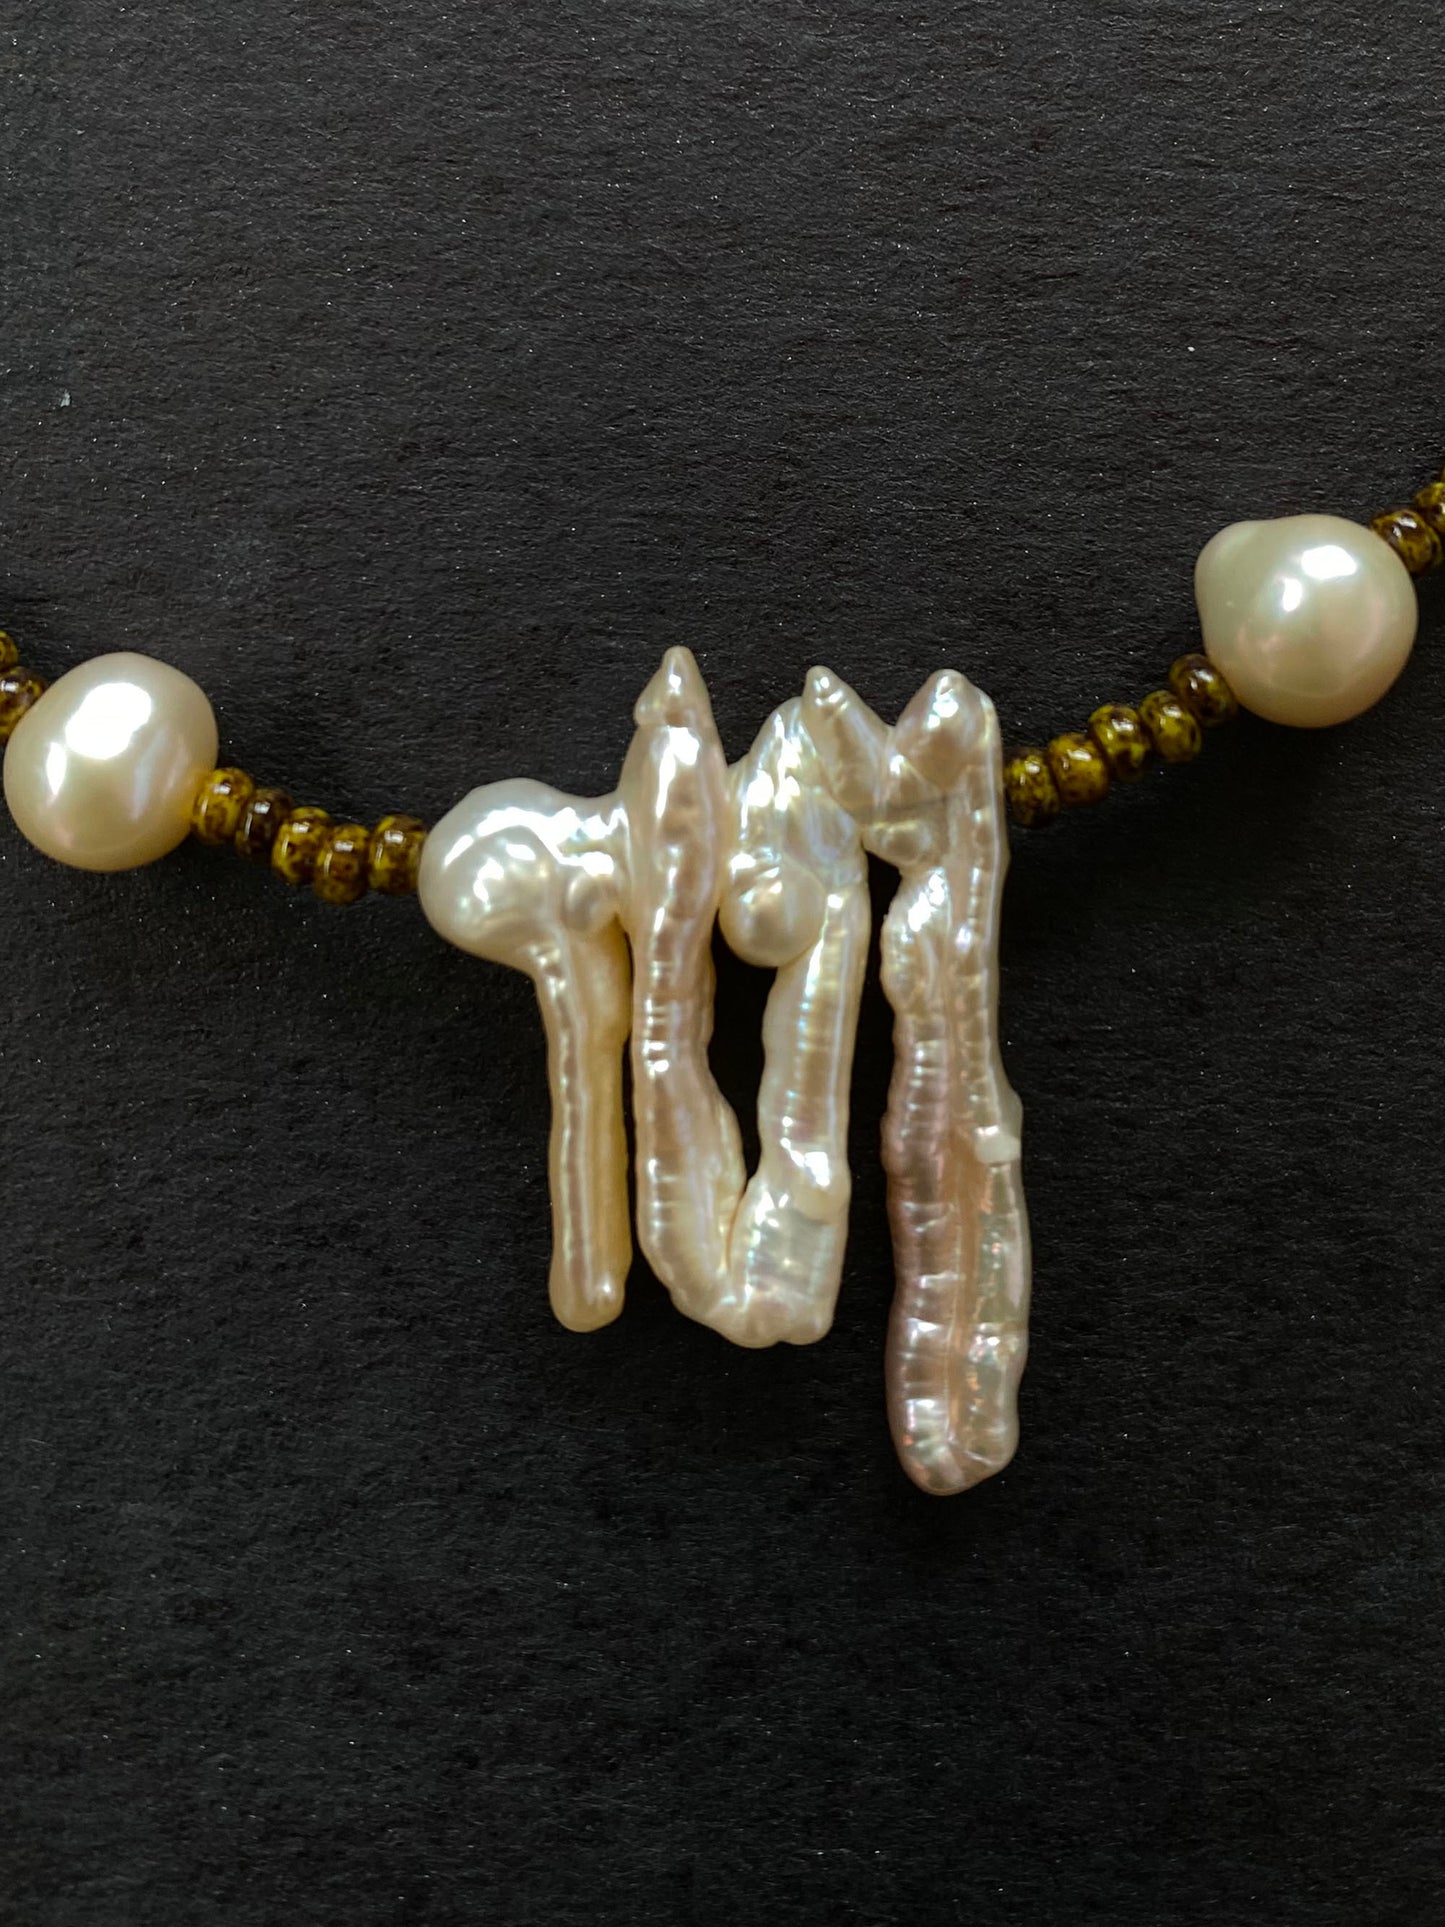 Unique Zen Pearl Necklace with Deep Olive Travertine Beads by Linda Queally